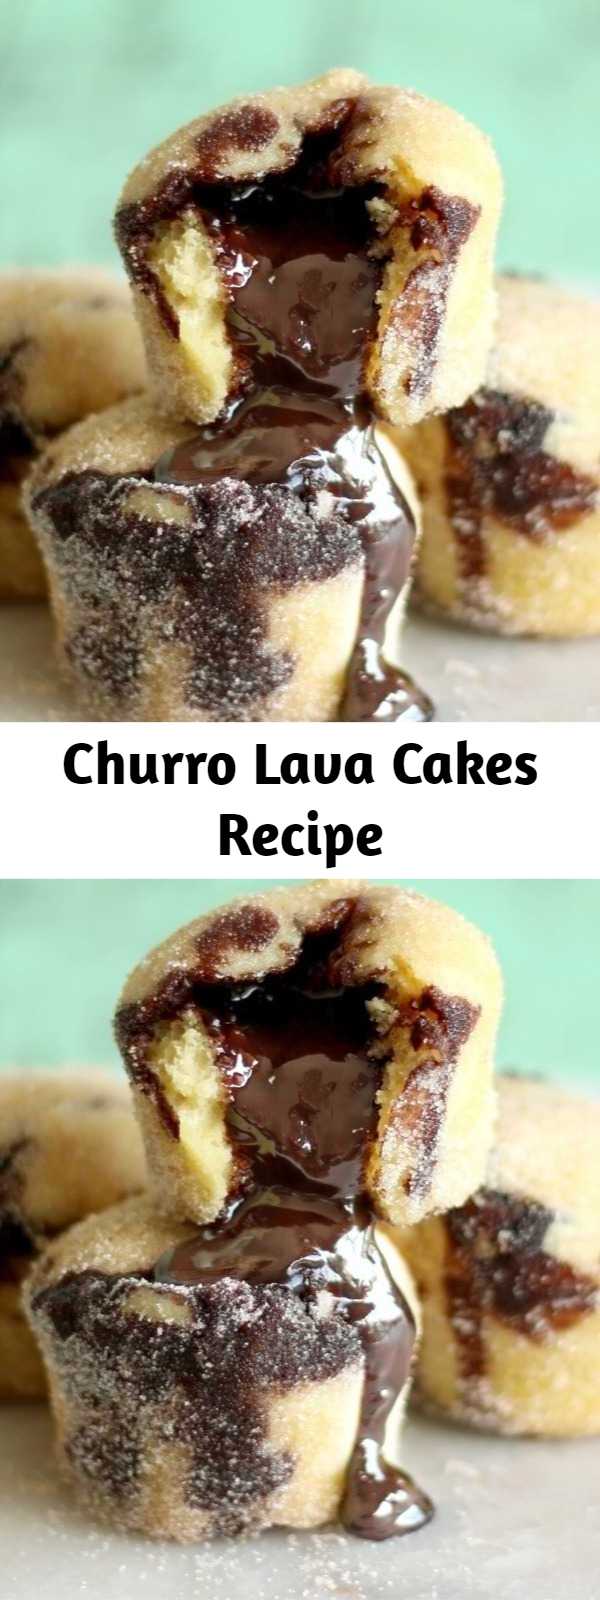 Churro Lava Cakes Recipe - Turn your favorite sweet, cinnamon-y snack into a bite-sized cake stuffed with warm chocolate.